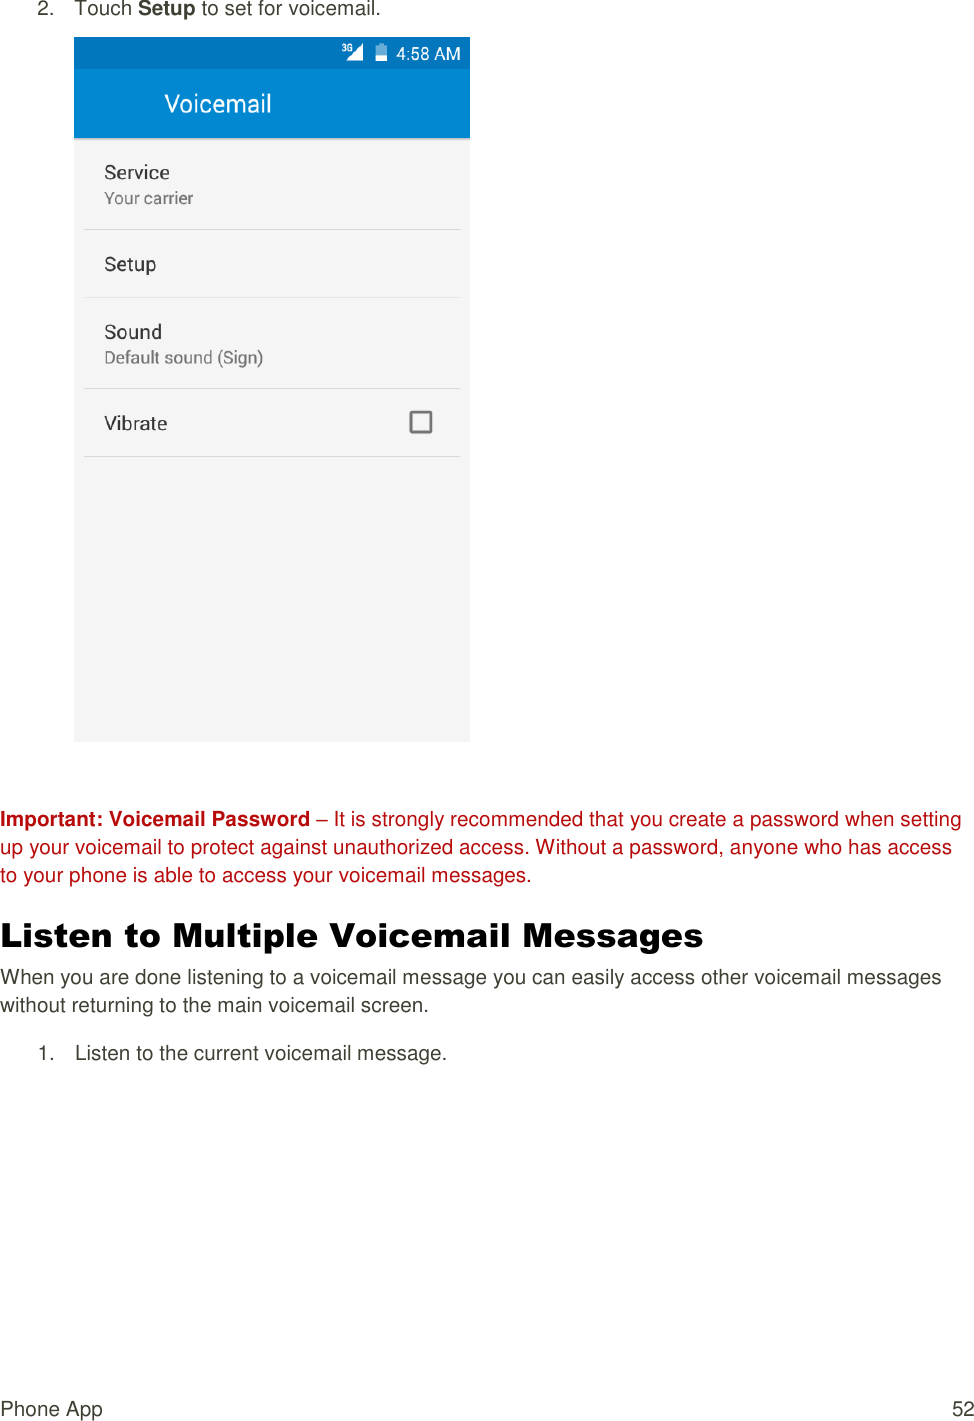 Phone App  52 2.  Touch Setup to set for voicemail.   Important: Voicemail Password – It is strongly recommended that you create a password when setting up your voicemail to protect against unauthorized access. Without a password, anyone who has access to your phone is able to access your voicemail messages. Listen to Multiple Voicemail Messages  When you are done listening to a voicemail message you can easily access other voicemail messages without returning to the main voicemail screen. 1.  Listen to the current voicemail message. 